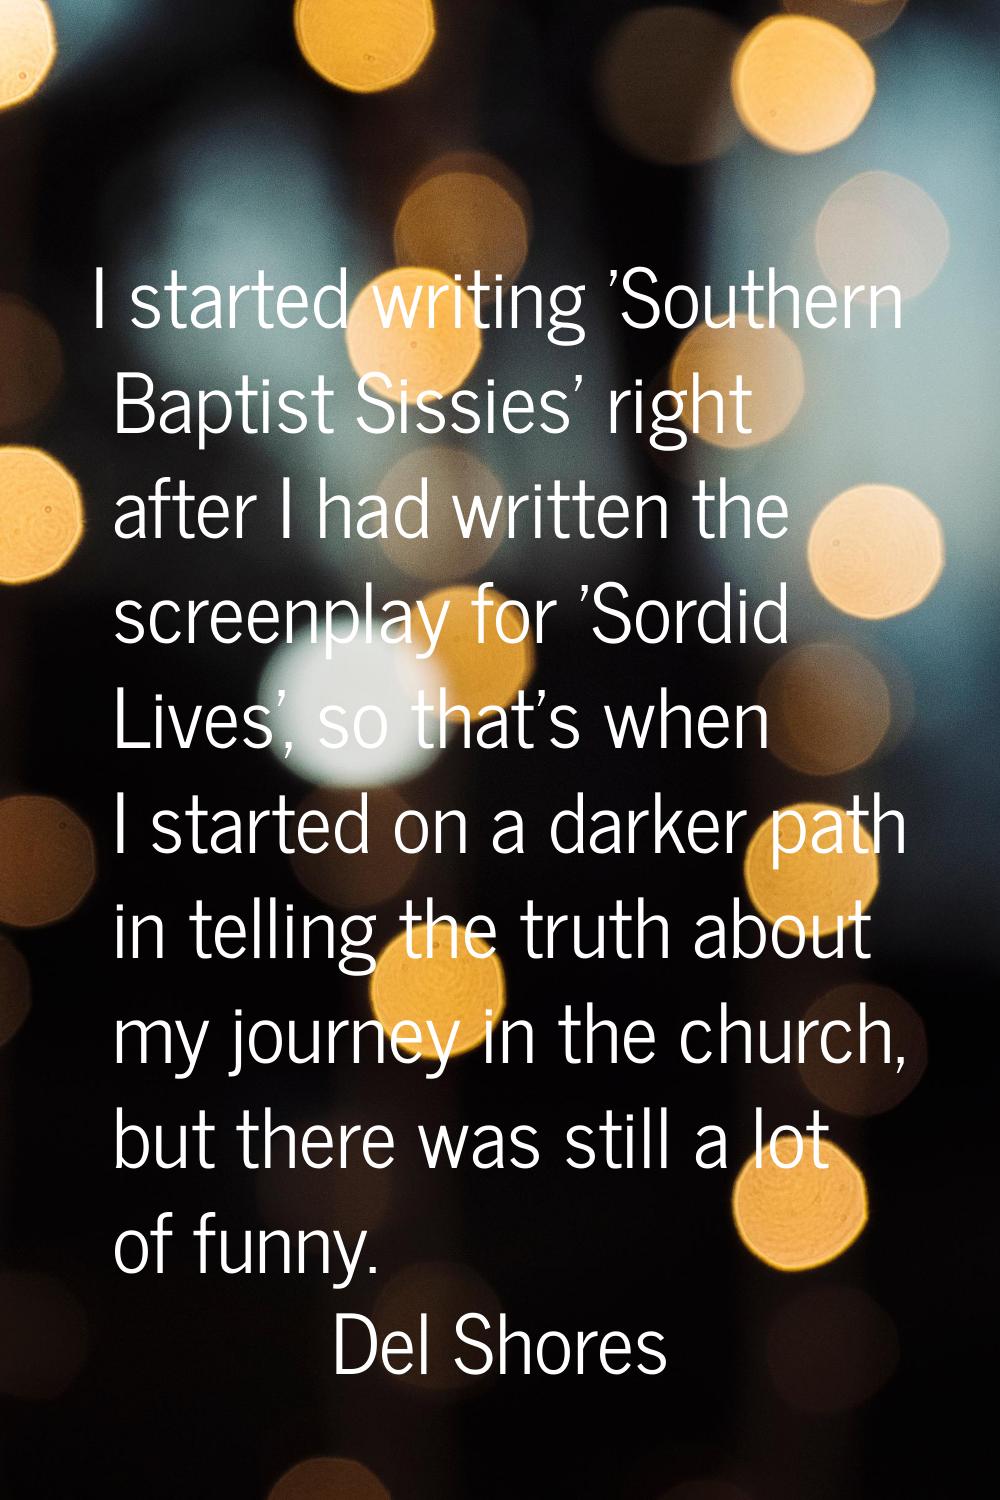 I started writing 'Southern Baptist Sissies' right after I had written the screenplay for 'Sordid L